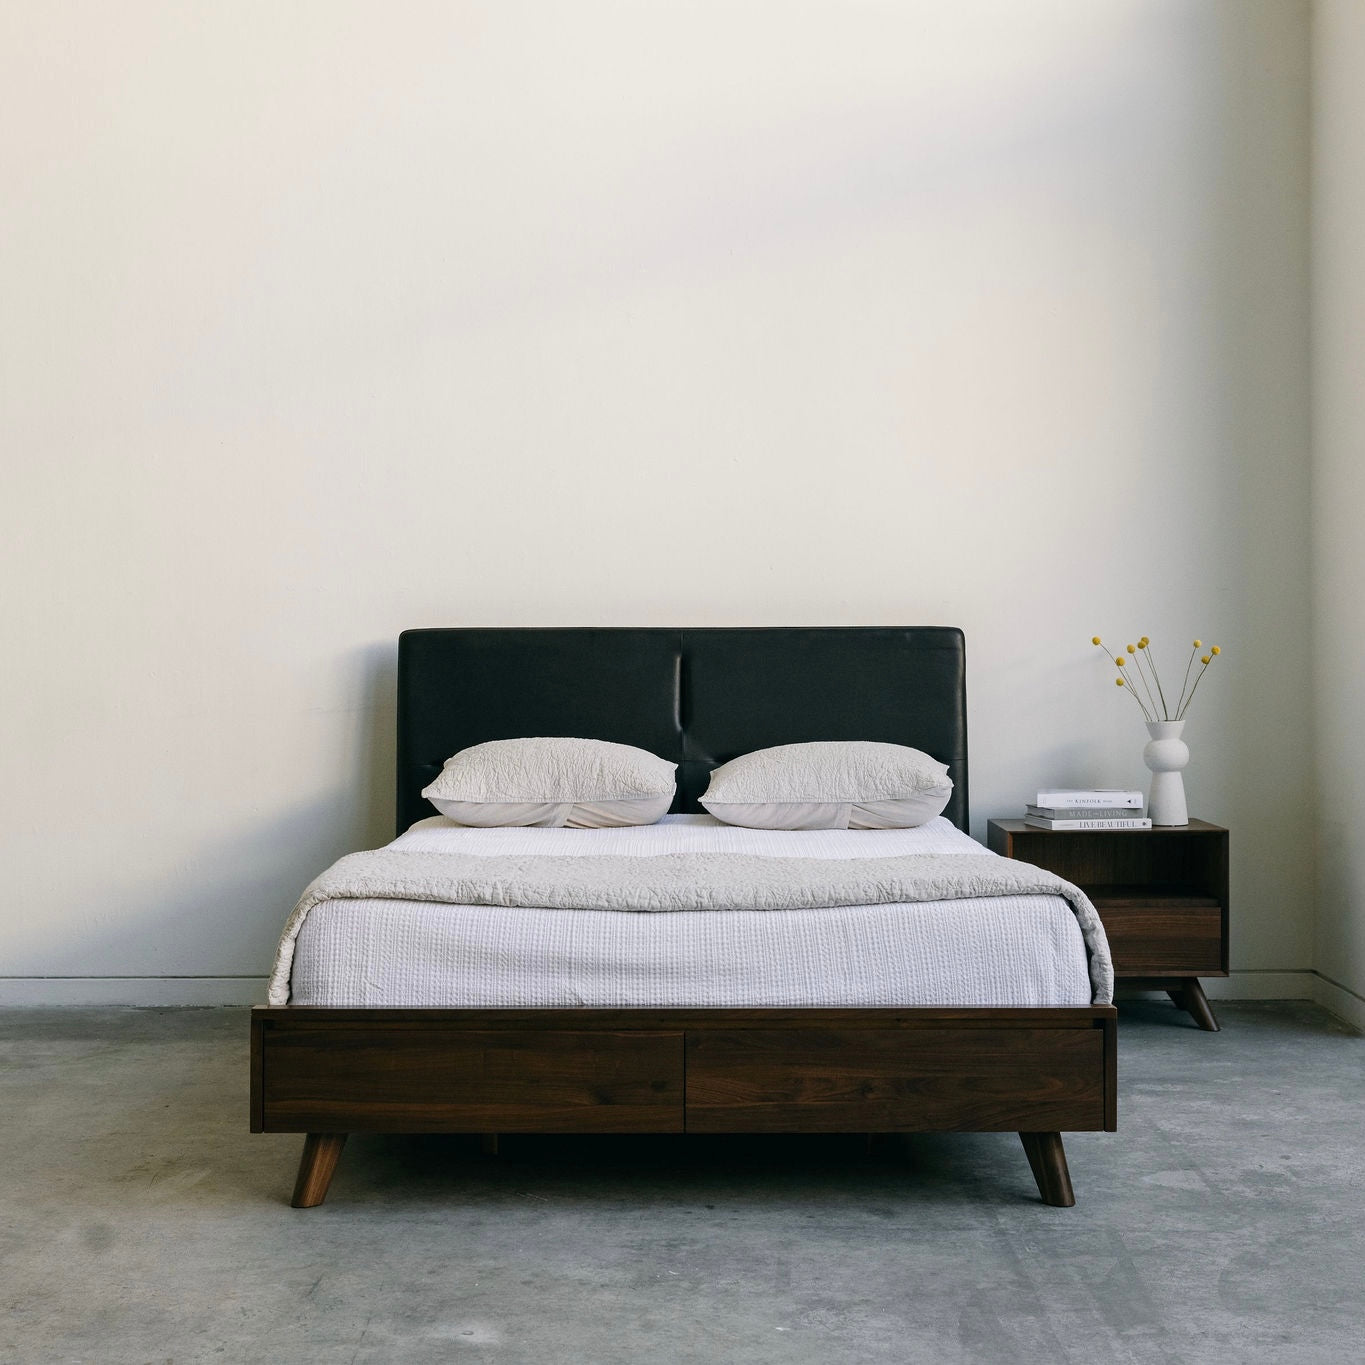 Mim Concept  best Modern furniture stores in Toronto, Ottawa and Mississauga to sell modern contemporary bedroom furniture and condo furniture. Italian leather headboard bed Low profile platform storage bed solid walnut wood